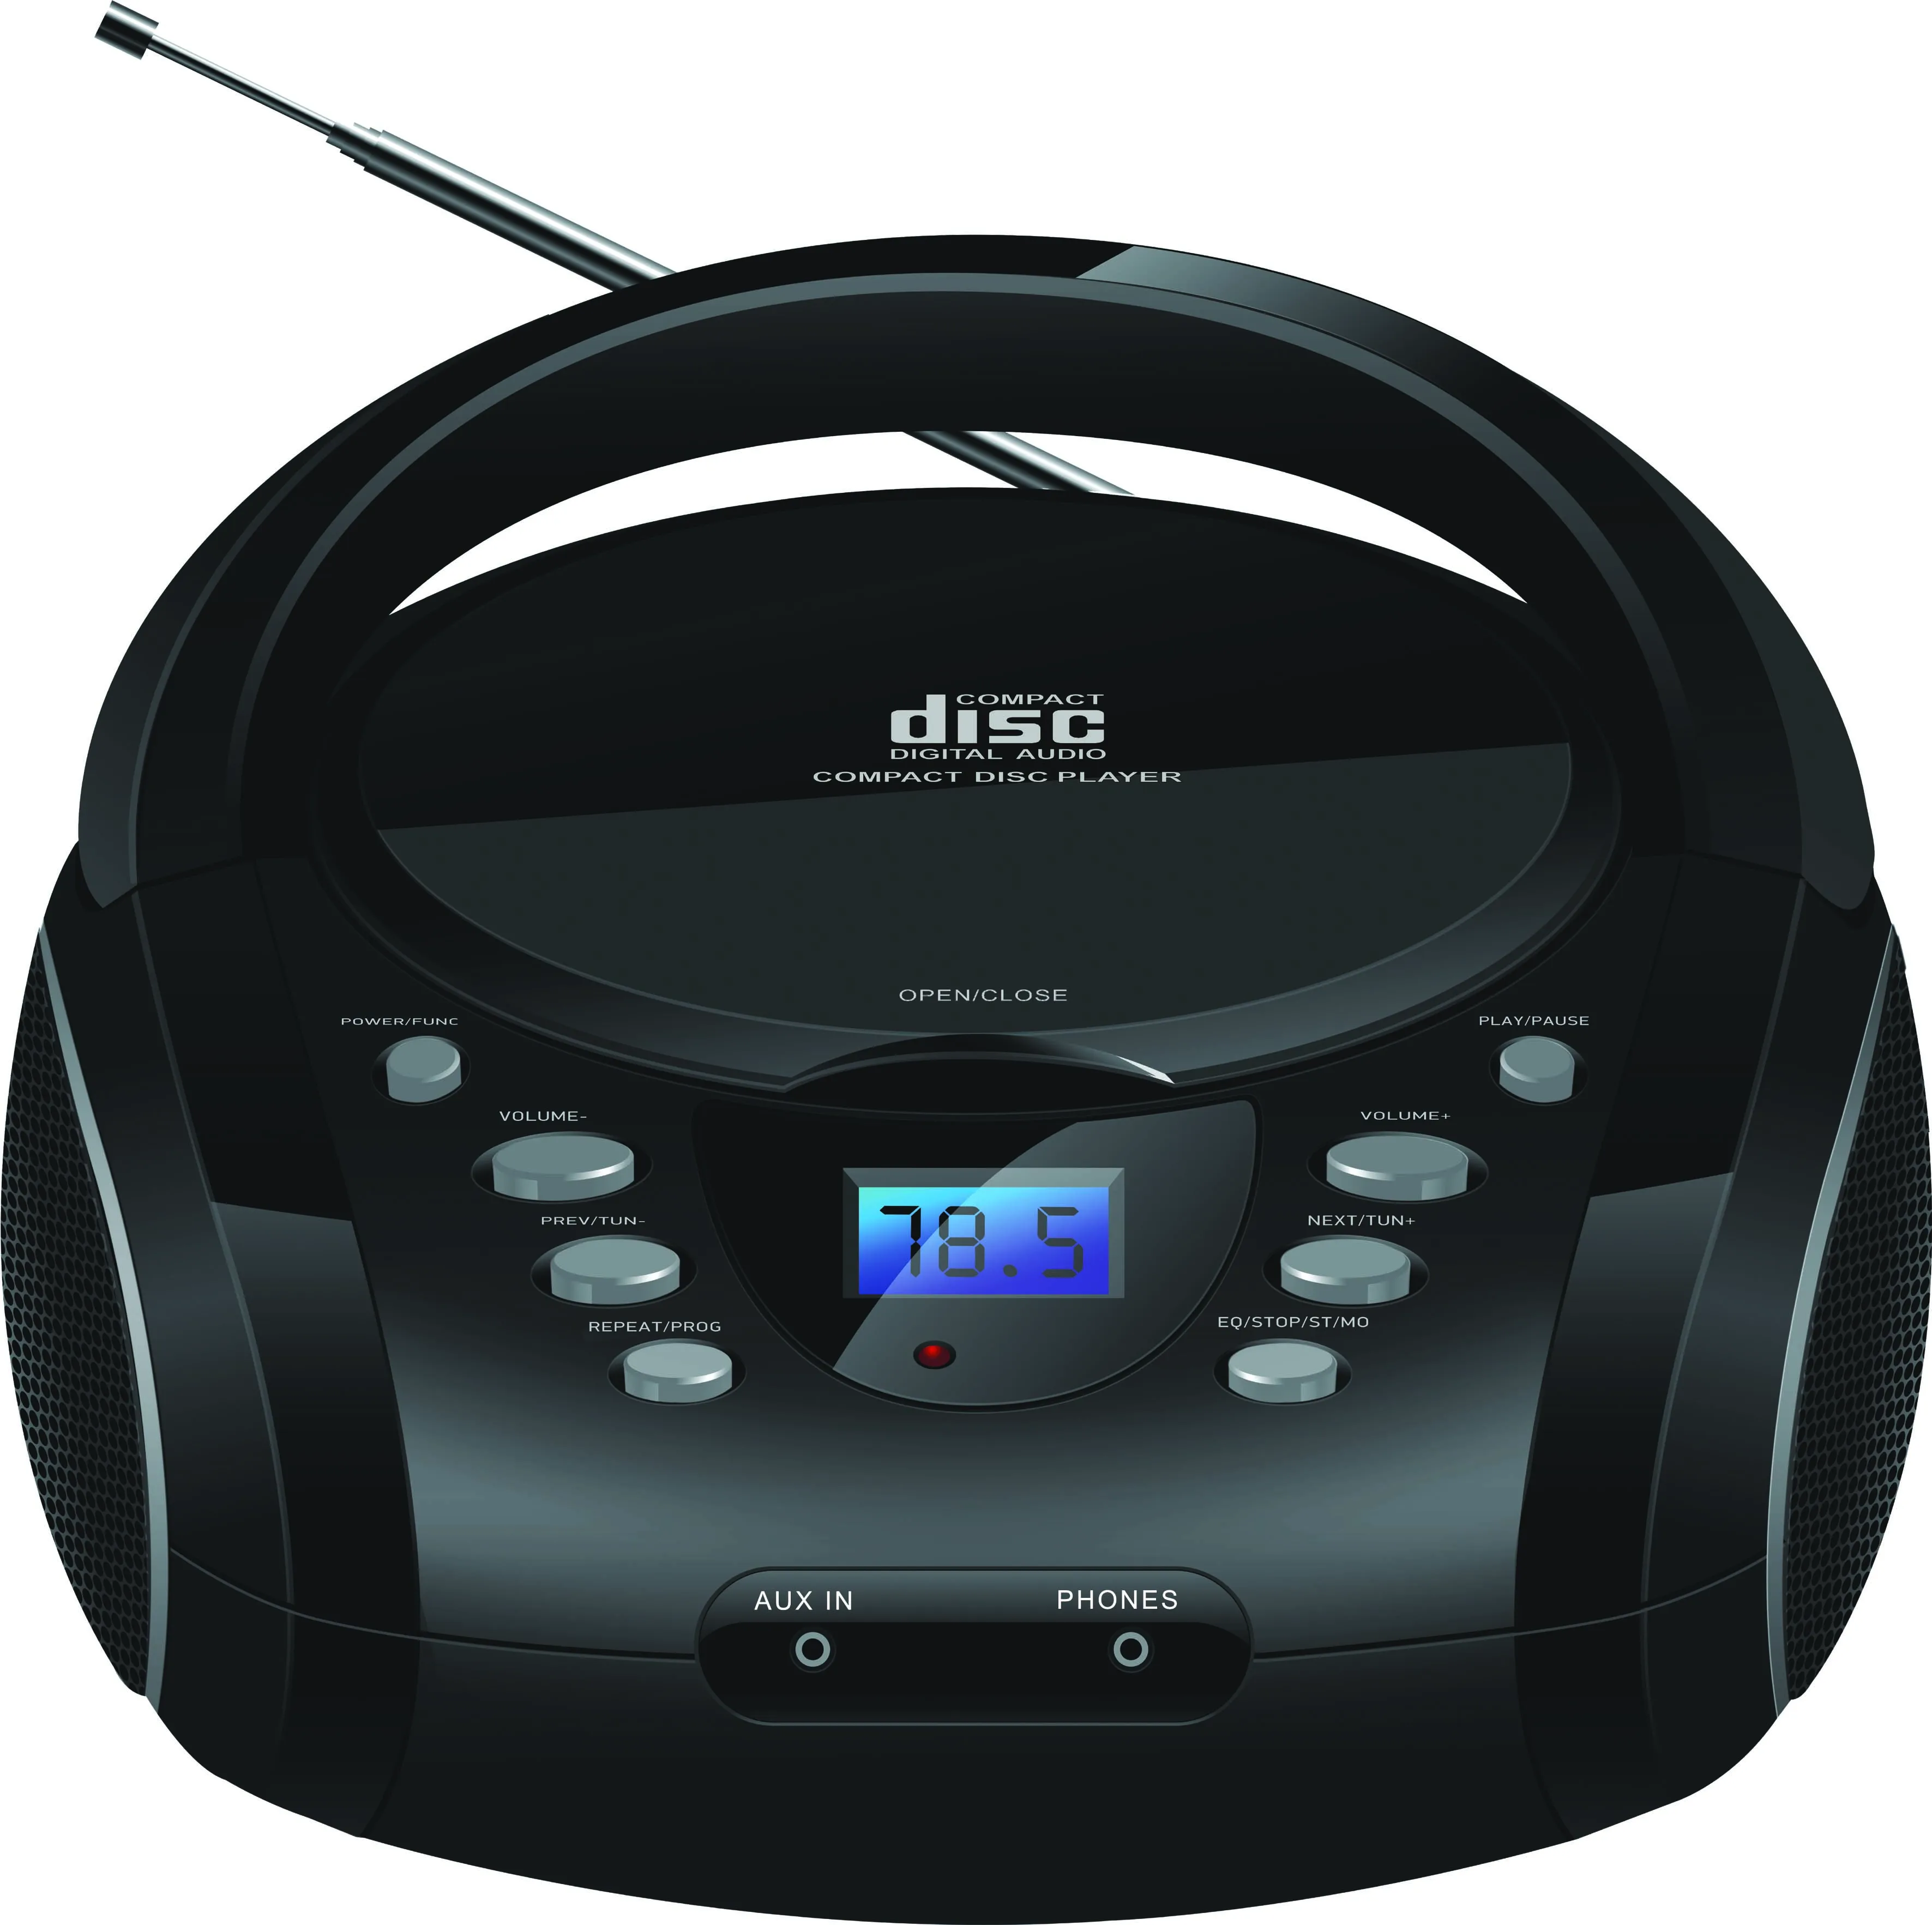 Mini Am Fm Radio Mp3 Player Outdoor Cd Player Buy Outdoor Cd